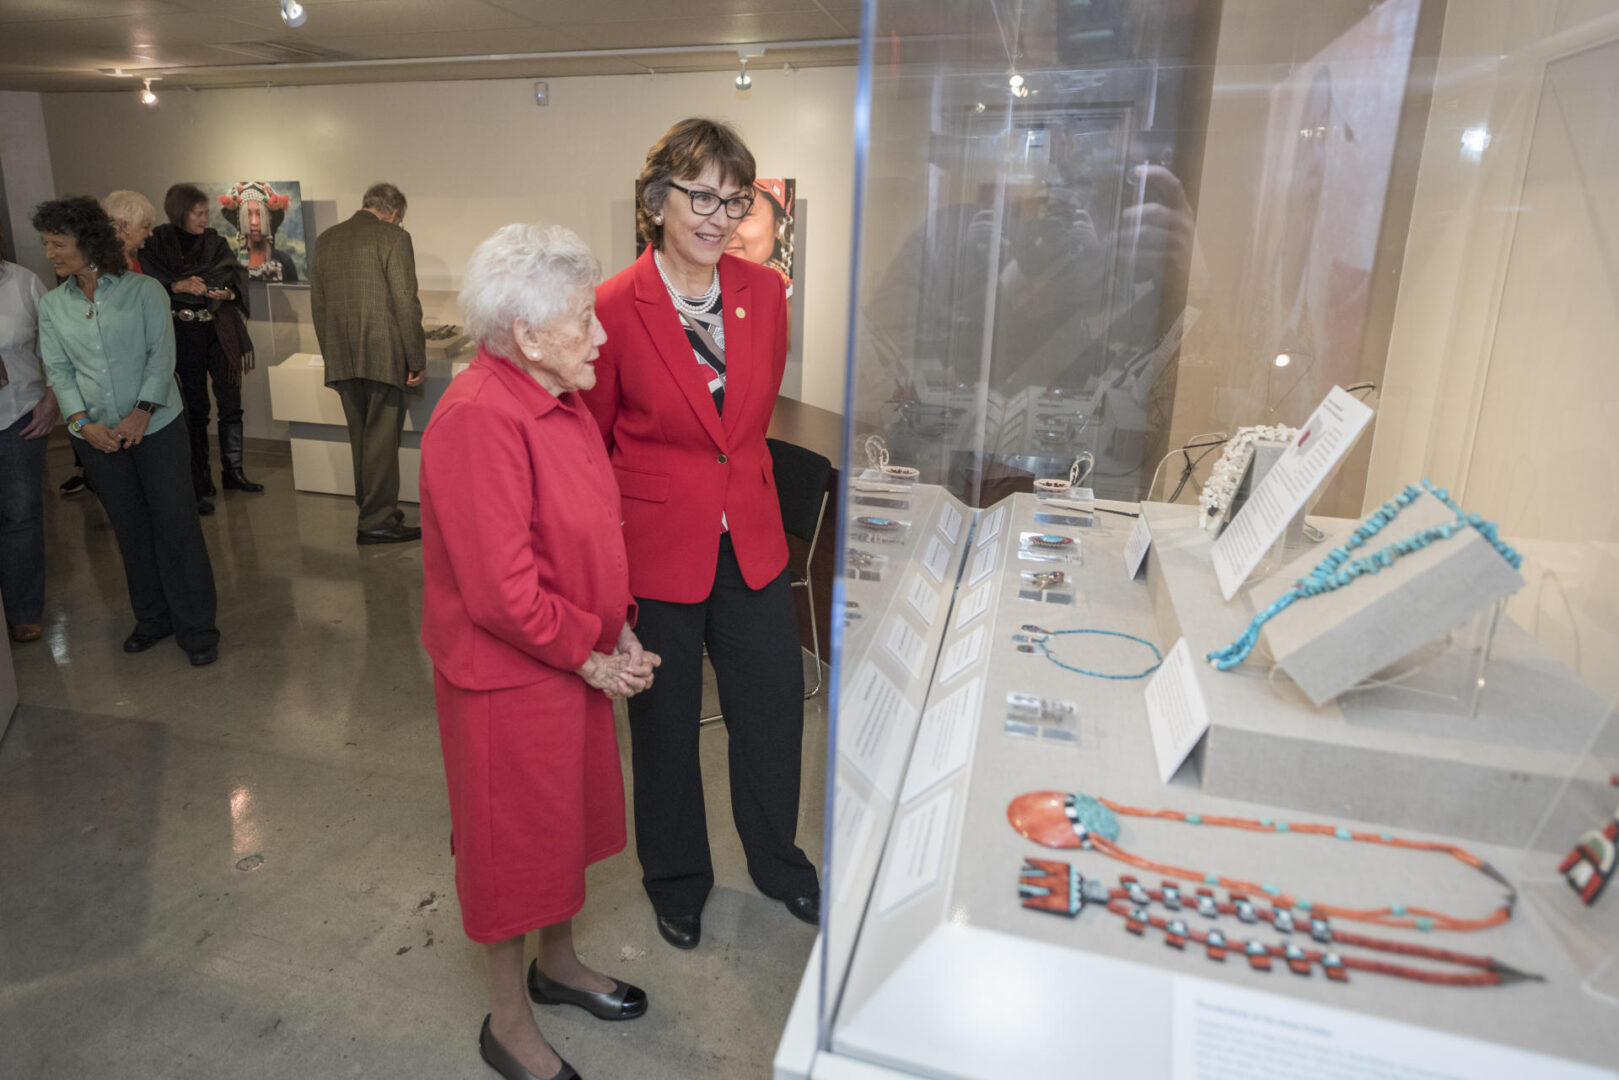 President Gayle Hutchinson and Valene L Smith admire jewelry in glass cases at the musuem.